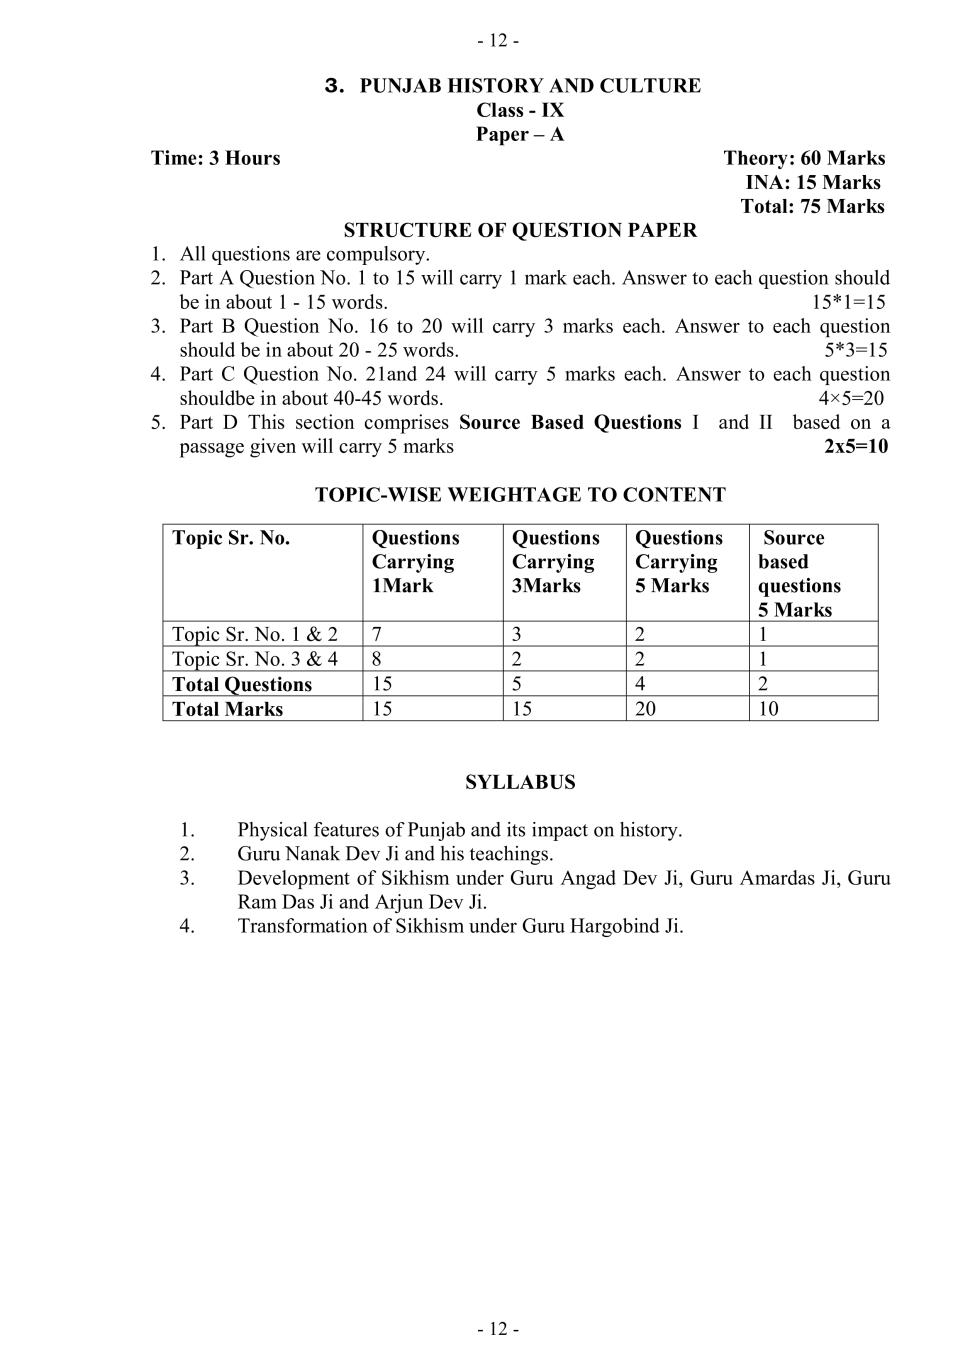 PSEB Syllabus 2020-21 for Class 9 Punjab History and Culture - Page 1